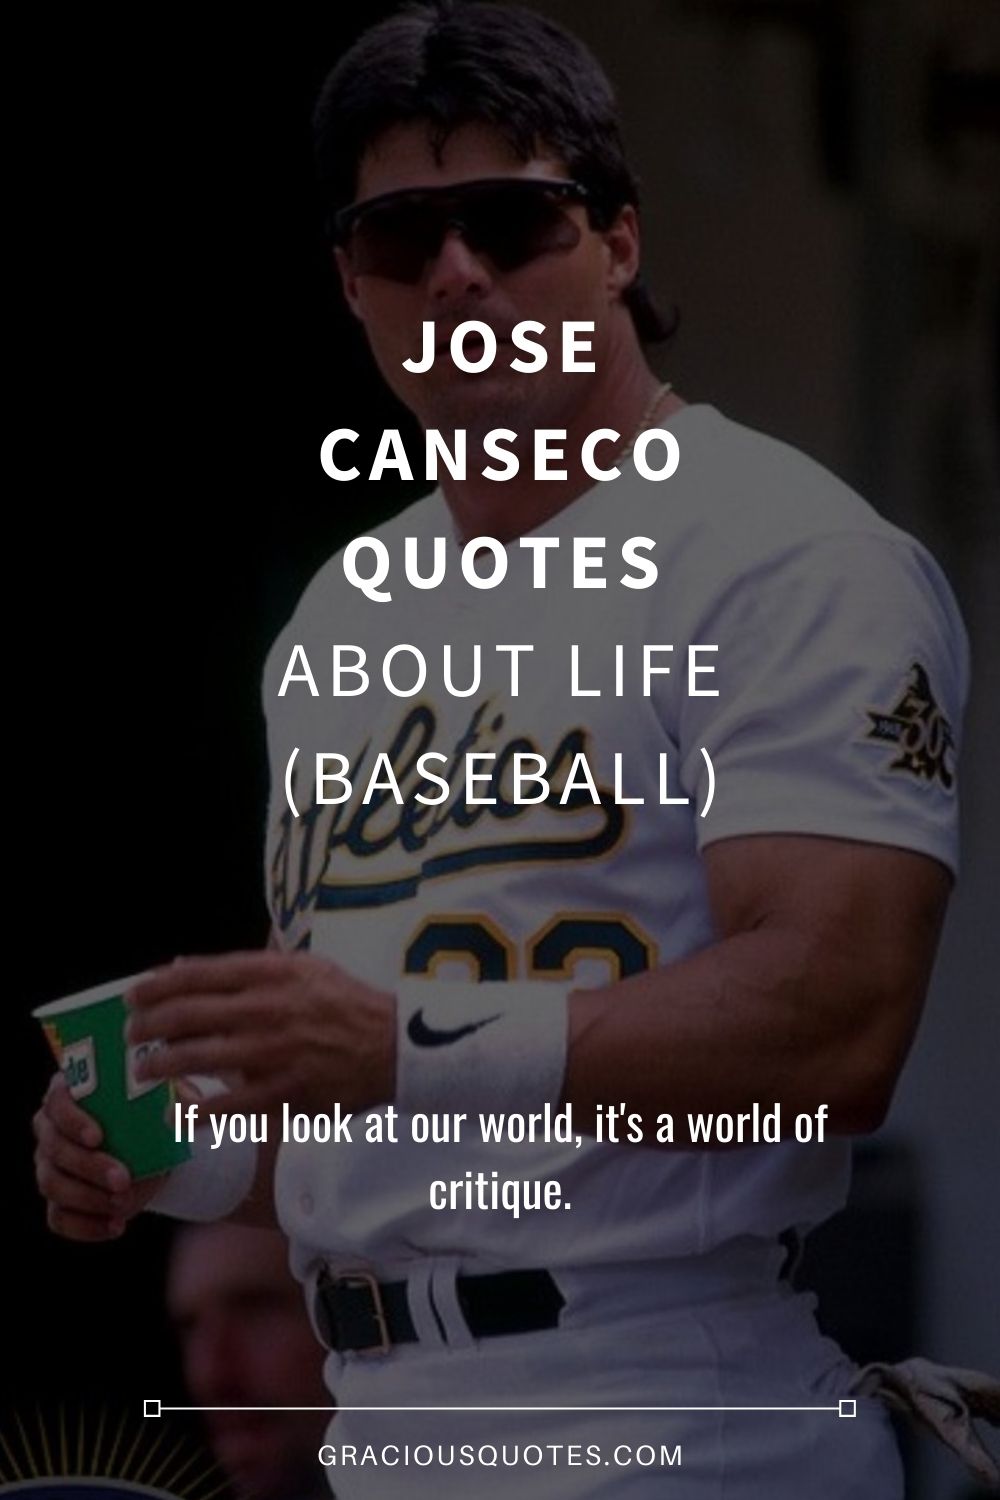 Jose Canseco Quotes About Life (BASEBALL) - Gracious Quotes